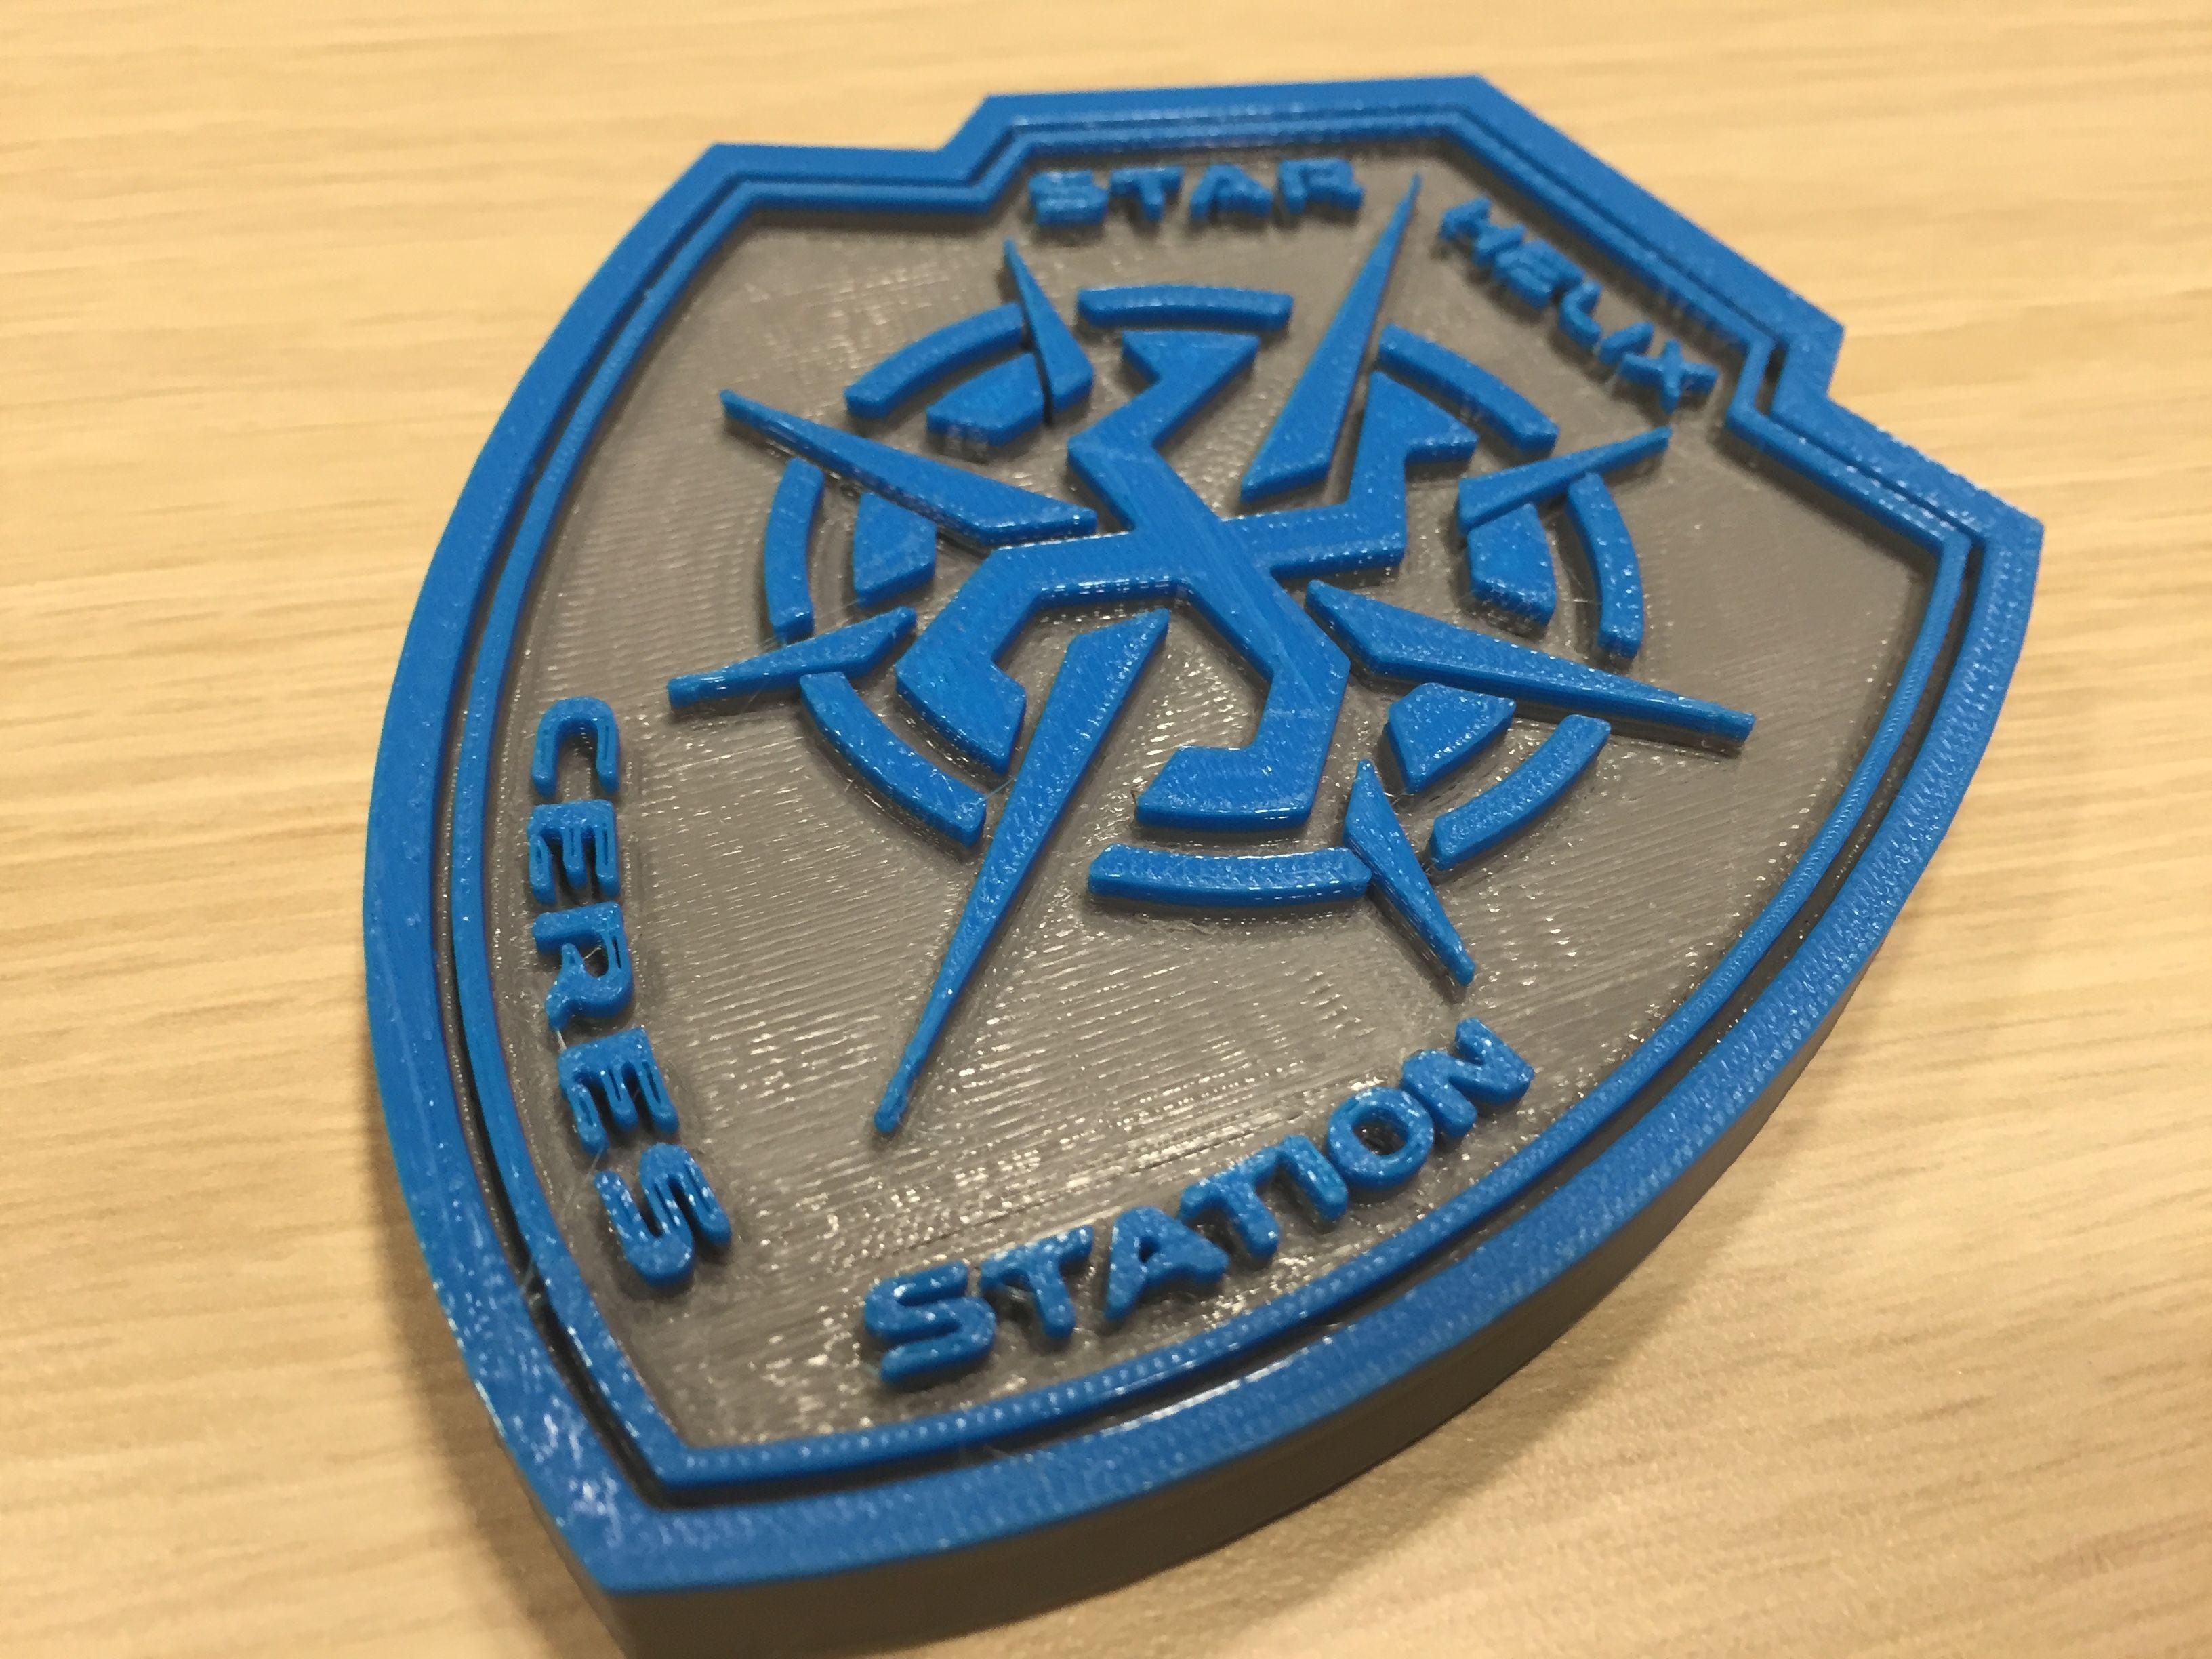 Blue and Green Helix Logo - The Expanse - Star Helix Security Logo by SYFY - Thingiverse